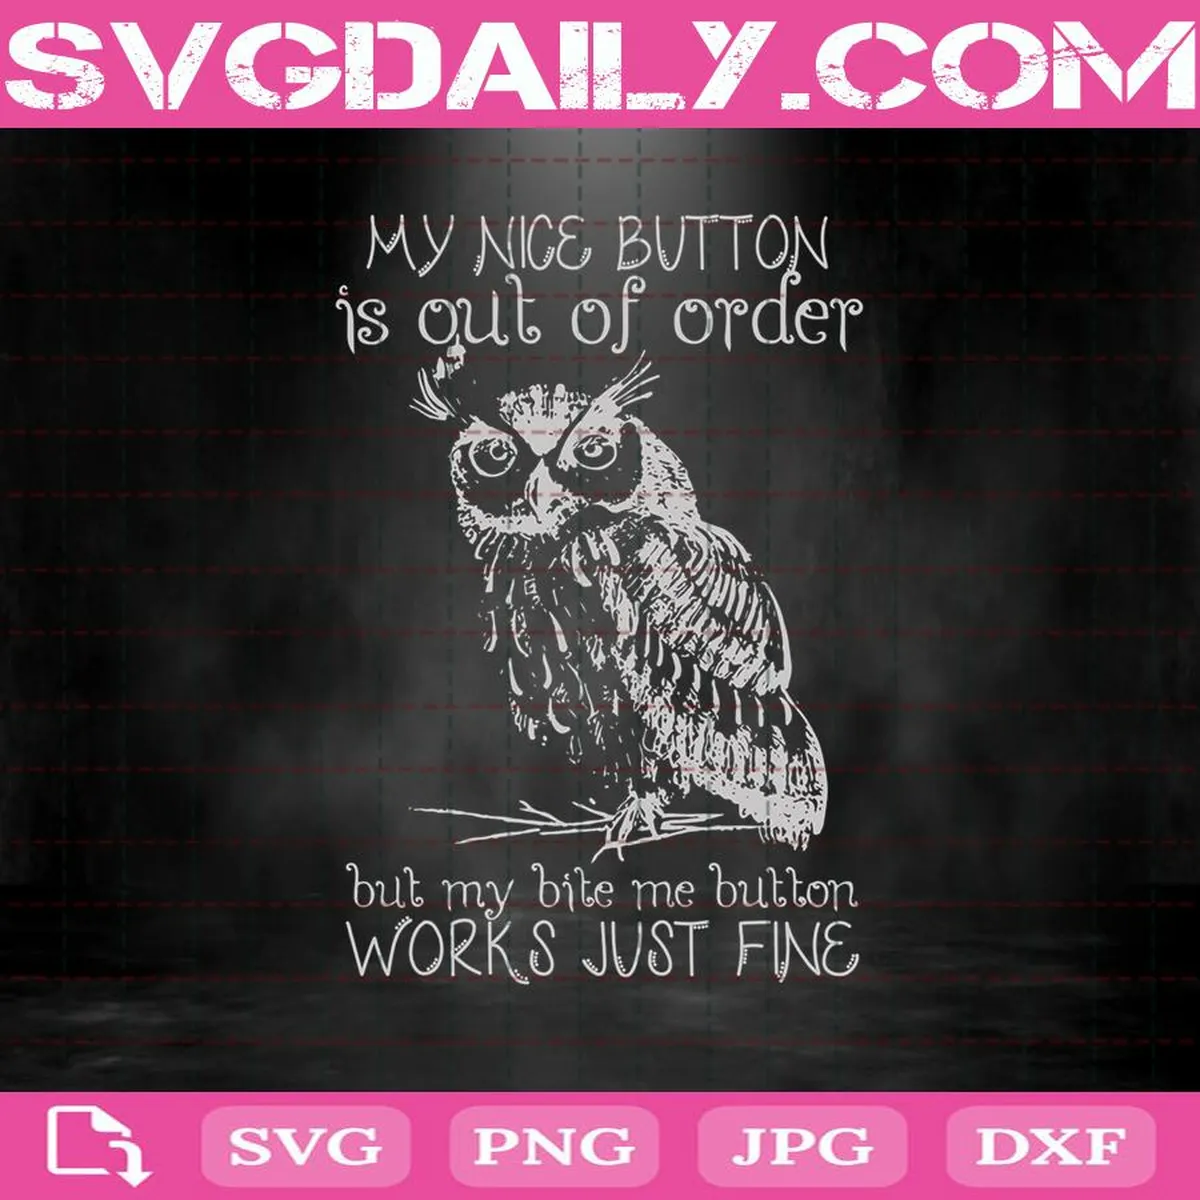 Owl My Nice Button Is Out Of Order But My Bite Me Button Works Just Fine Svg, Owl Svg, Svg Dxf Png Eps Cutting Cut File Silhouette Cricut